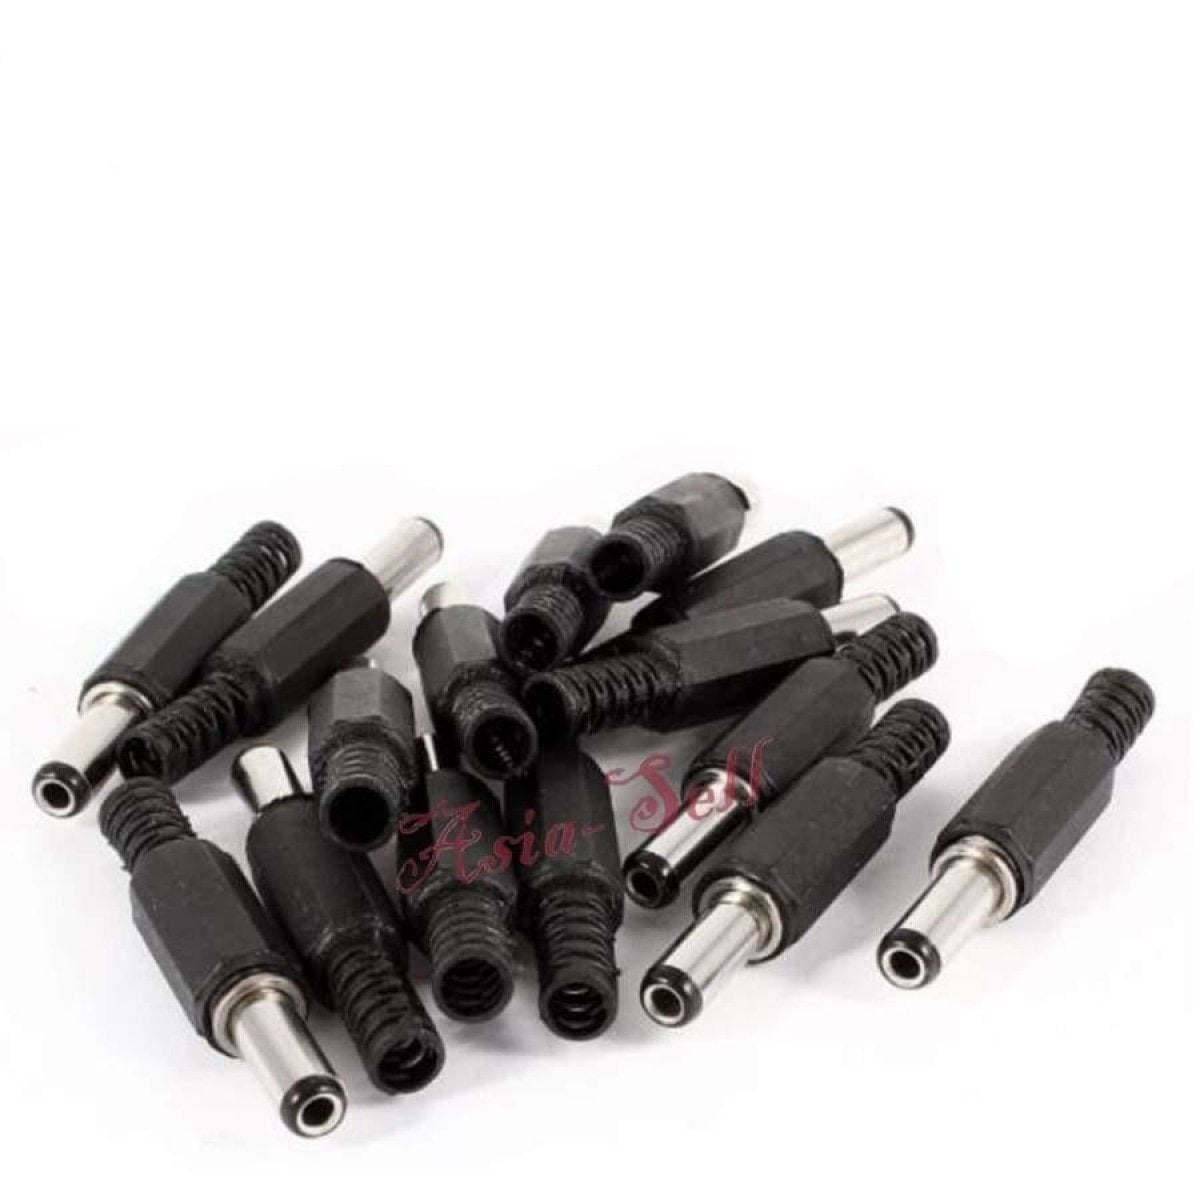 10pcs DC 5.5x2.1mm Power Cable Male Plug 14mm Shaft Connector Adaptor Plastic - Asia Sell